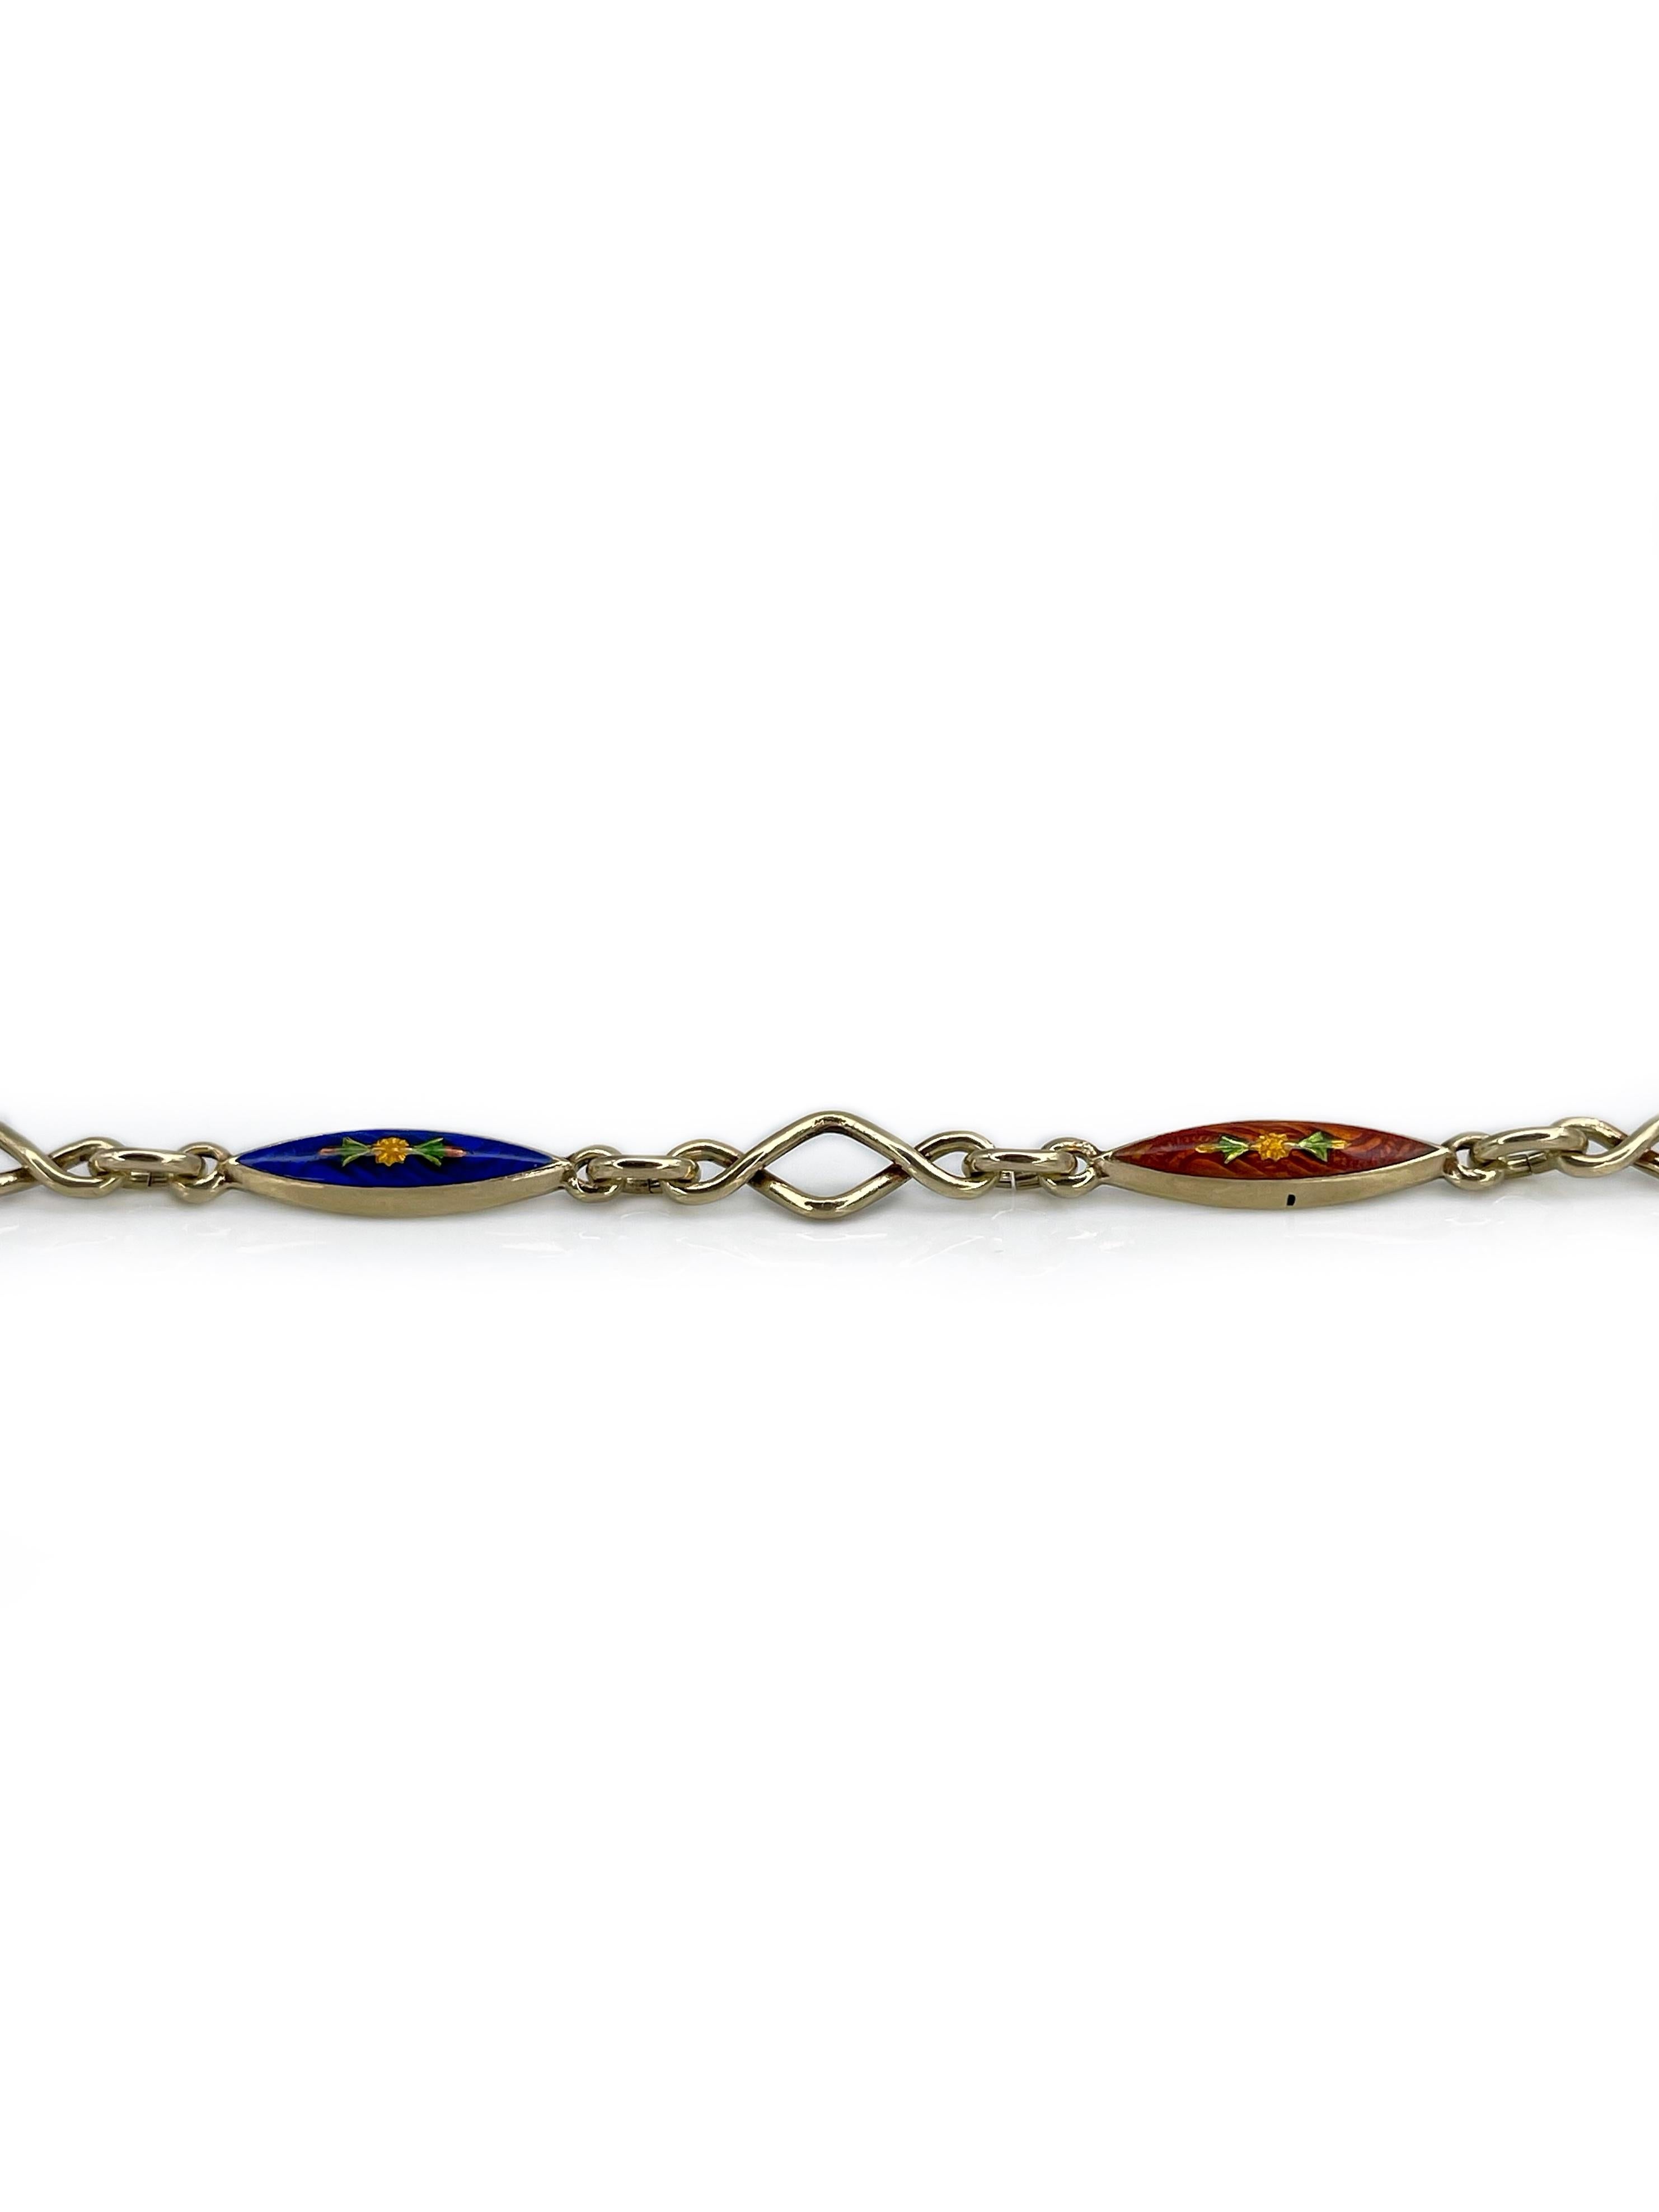 This is a lovely Victorian chain bracelet crafted in 14K gold. It features red and blue guilloche enamel floral motif segments. 

Has a safe clasp.

Weight: 4.95g
Length: 19cm

 ———

If you have any questions, please feel free to ask. We describe